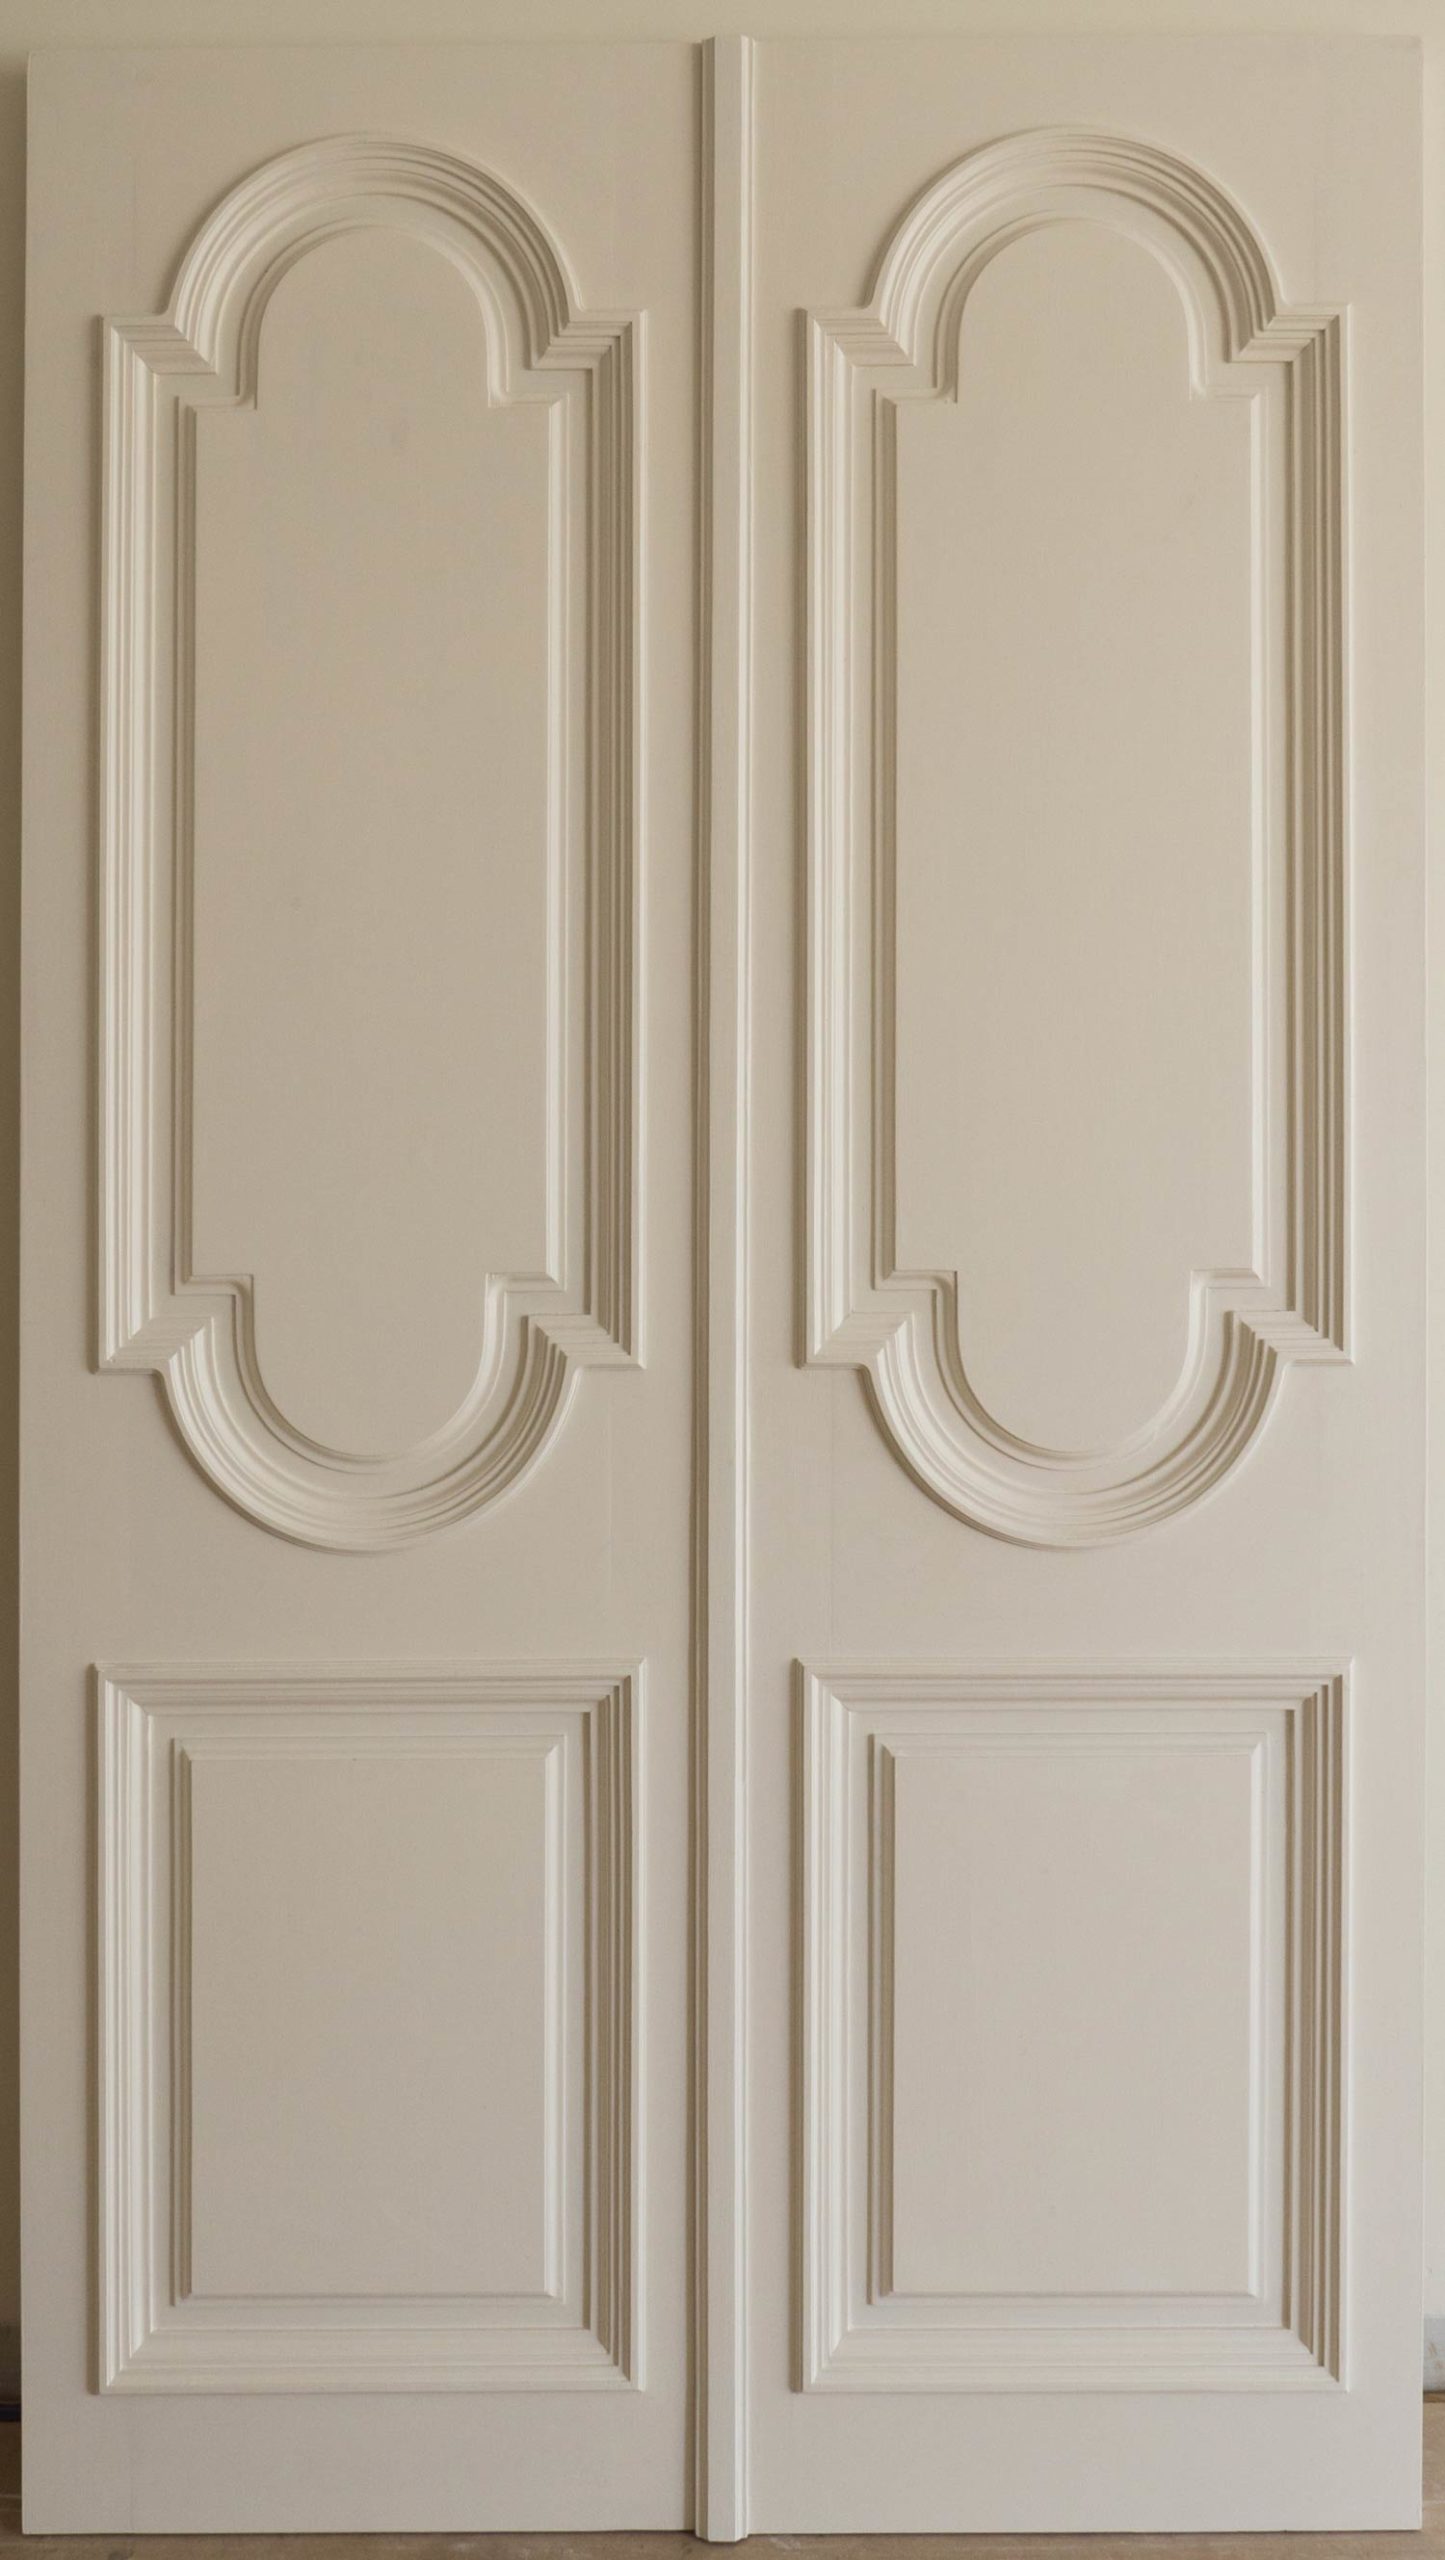 28 French classical Louis door design and interiors